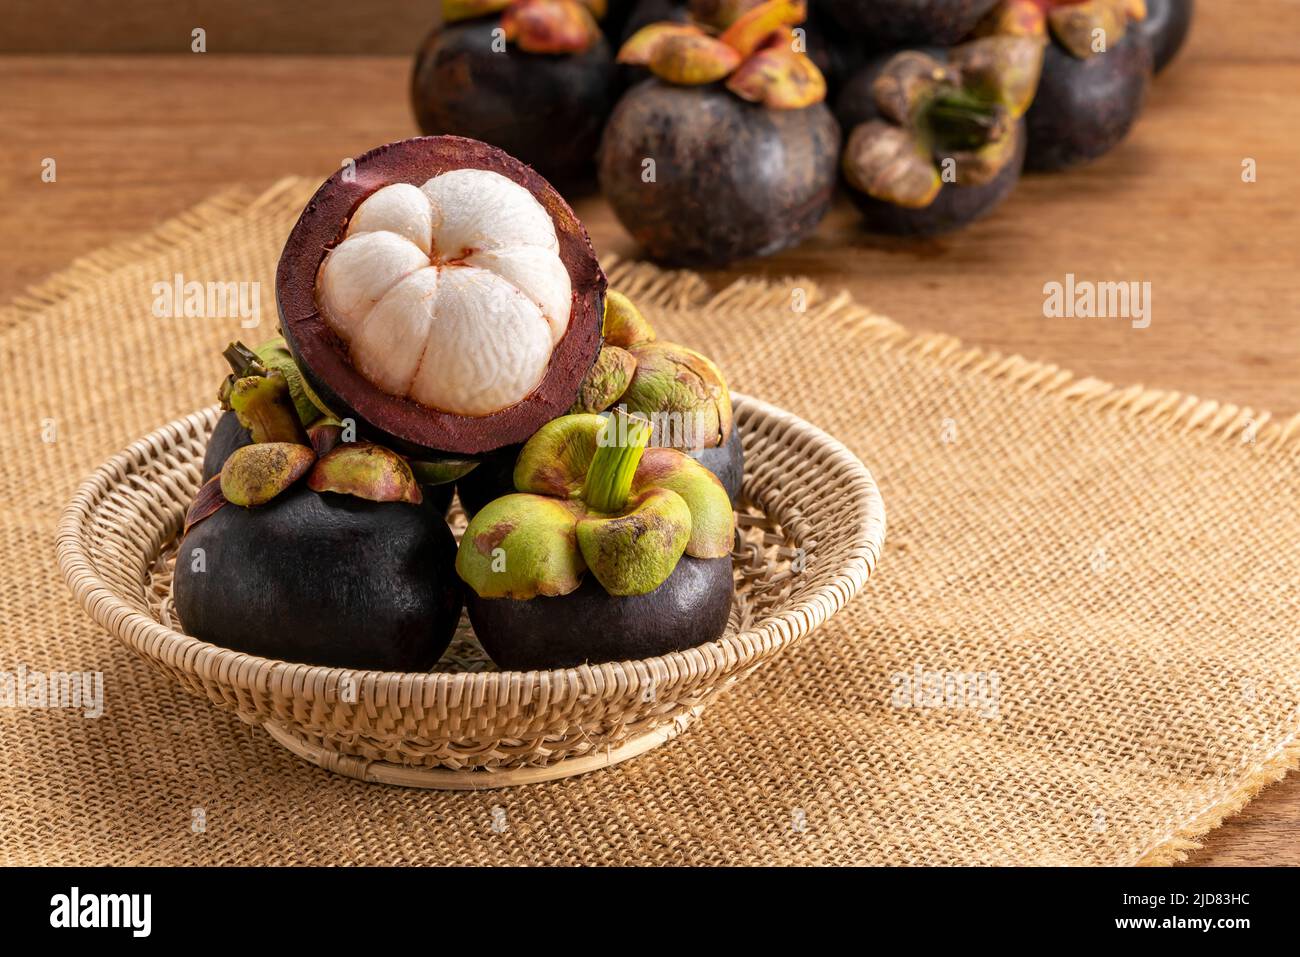 Pile of fresh mangosteen fruit in bamboo basket on sackcloth and in the background on wooden table. Stock Photo